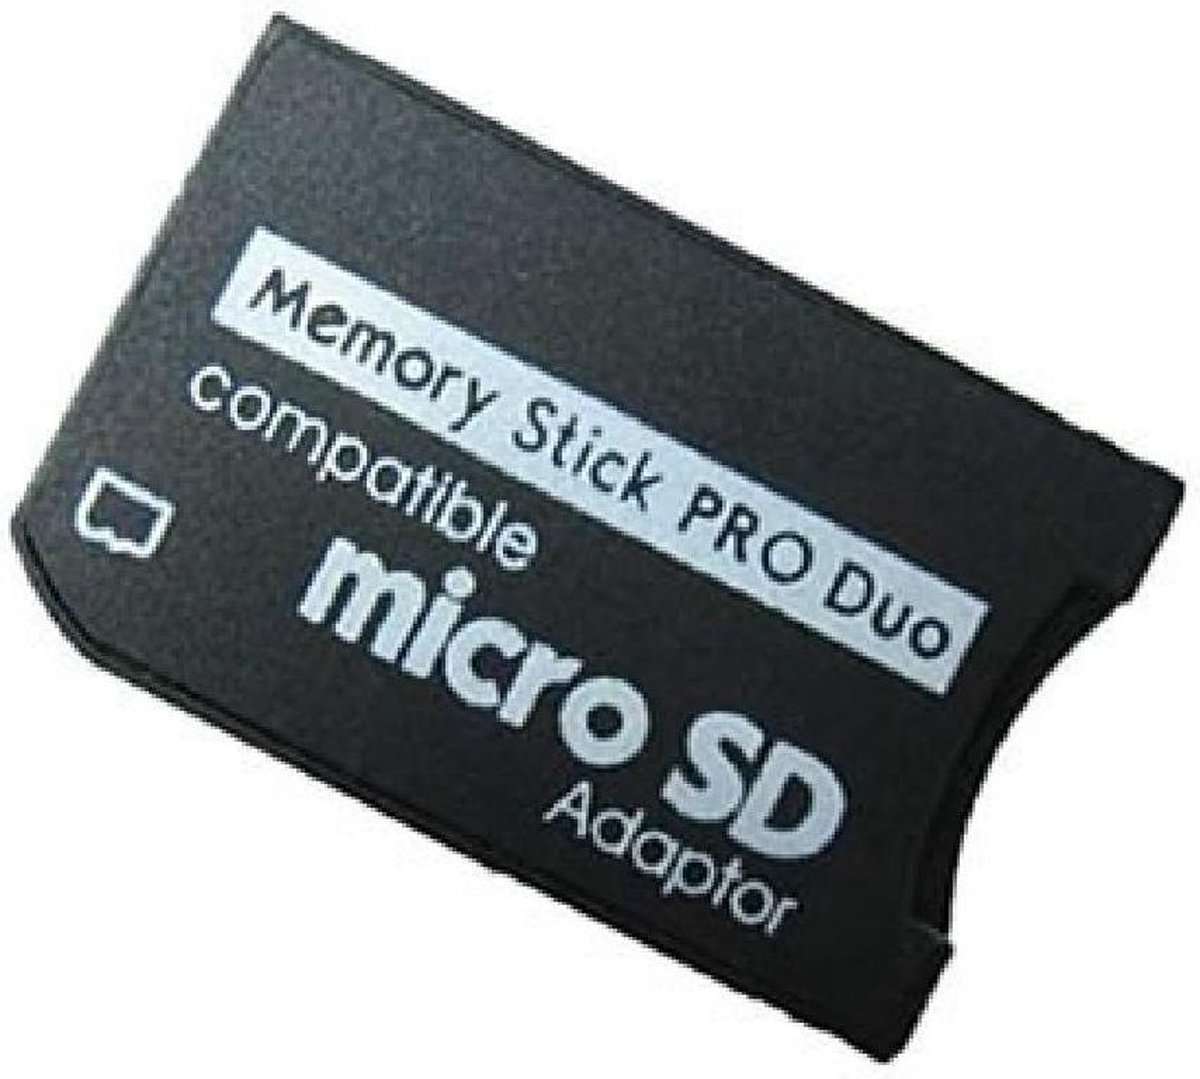 Micro SD to MS Pro Duo memory card adapter for Sony 2000 & 3000 handheld... | bol.com